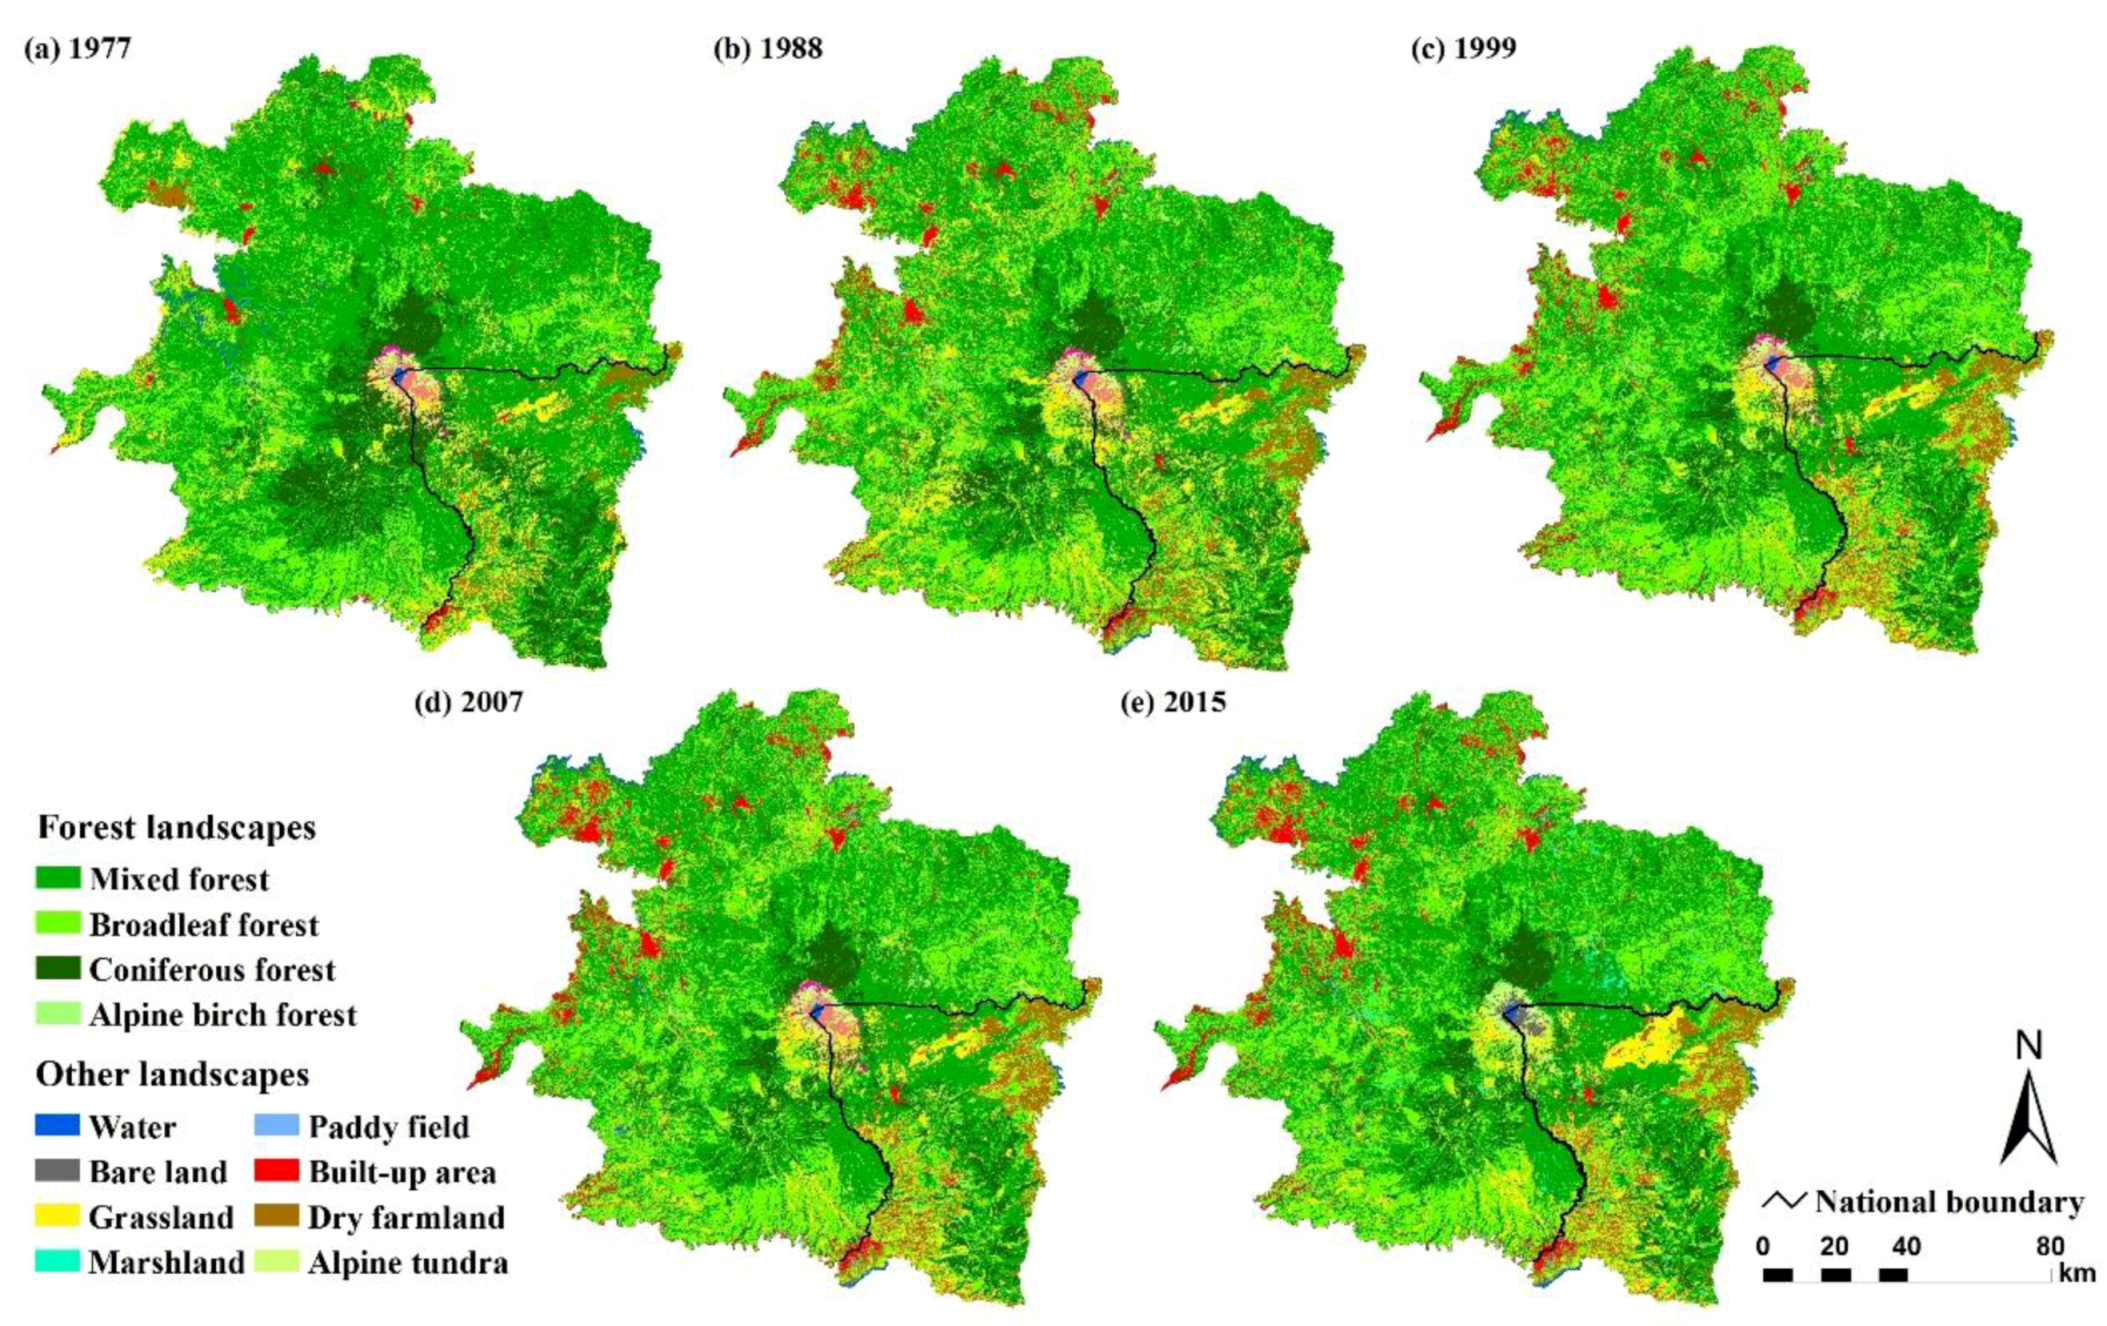 Sustainability Free Full Text Spatiotemporal Patterns Of Forest In The Transnational Area Of Changbai Mountain From 1977 To 15 A Comparative Analysis Of The Chinese And Dprk Sub Regions Html